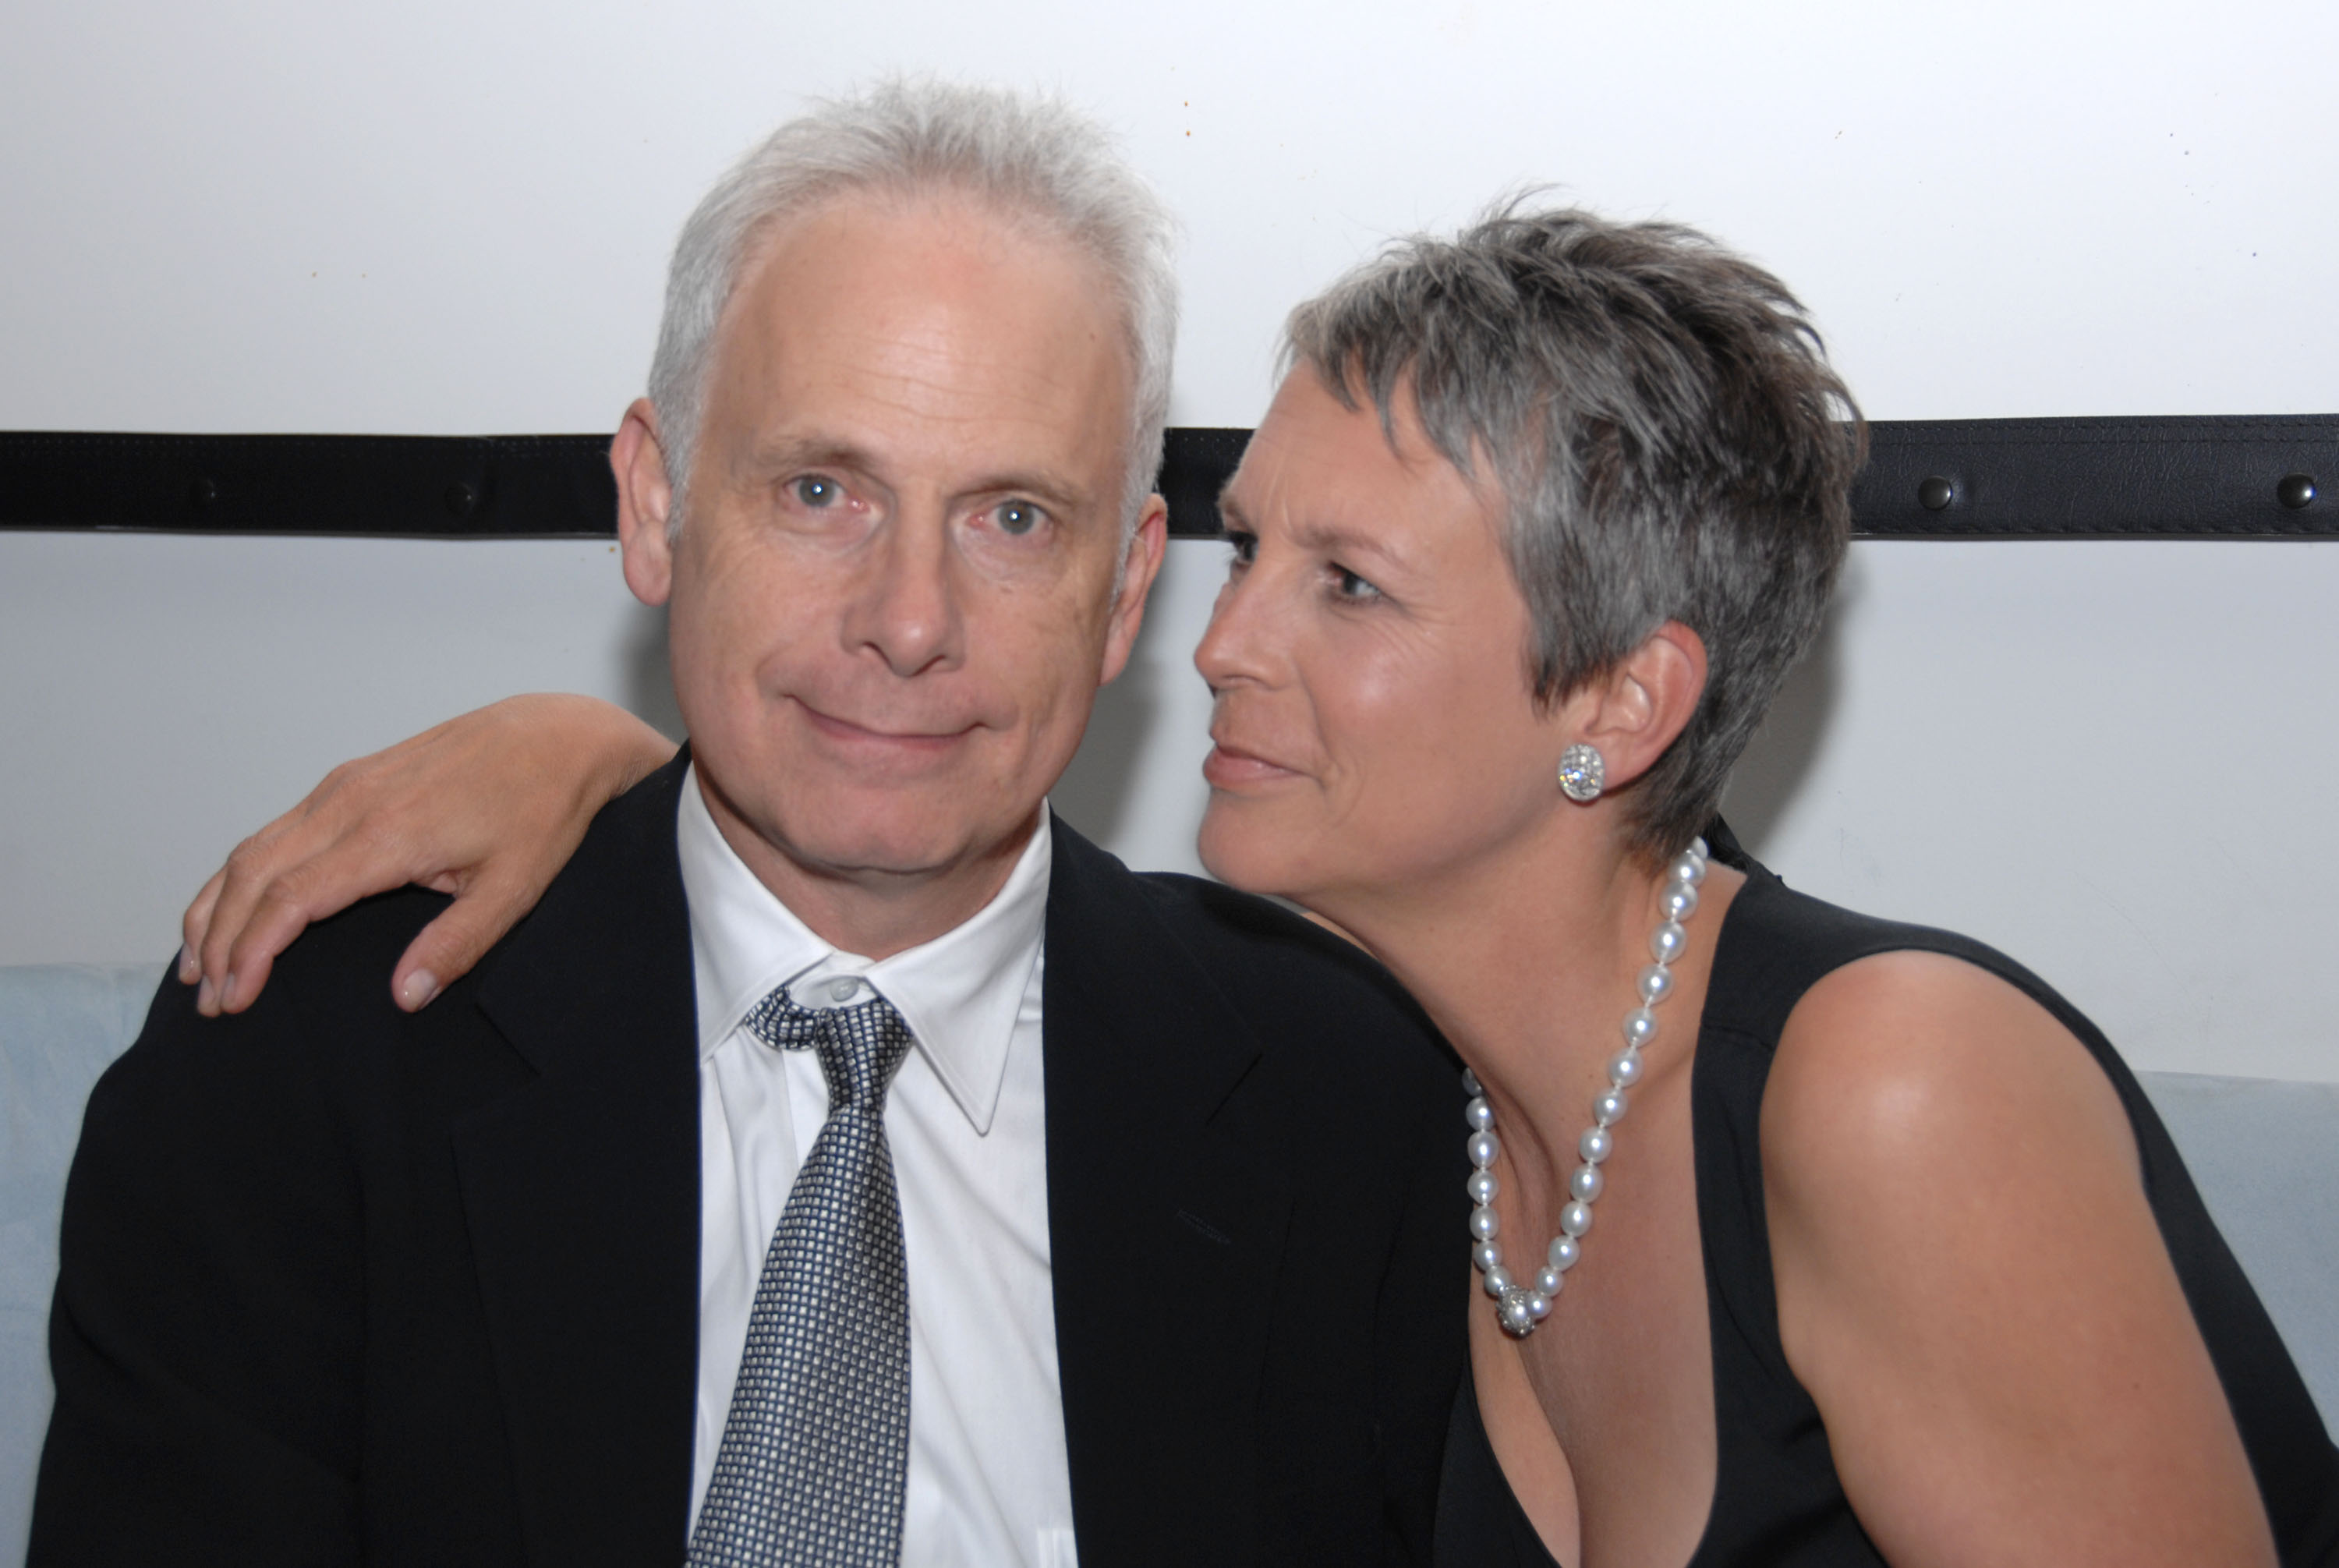 Christopher Guest and Jamie Lee Curtis at the 31st Annual Toronto International Film Festival - "For Your Consideration" After Party | Source: Getty Images